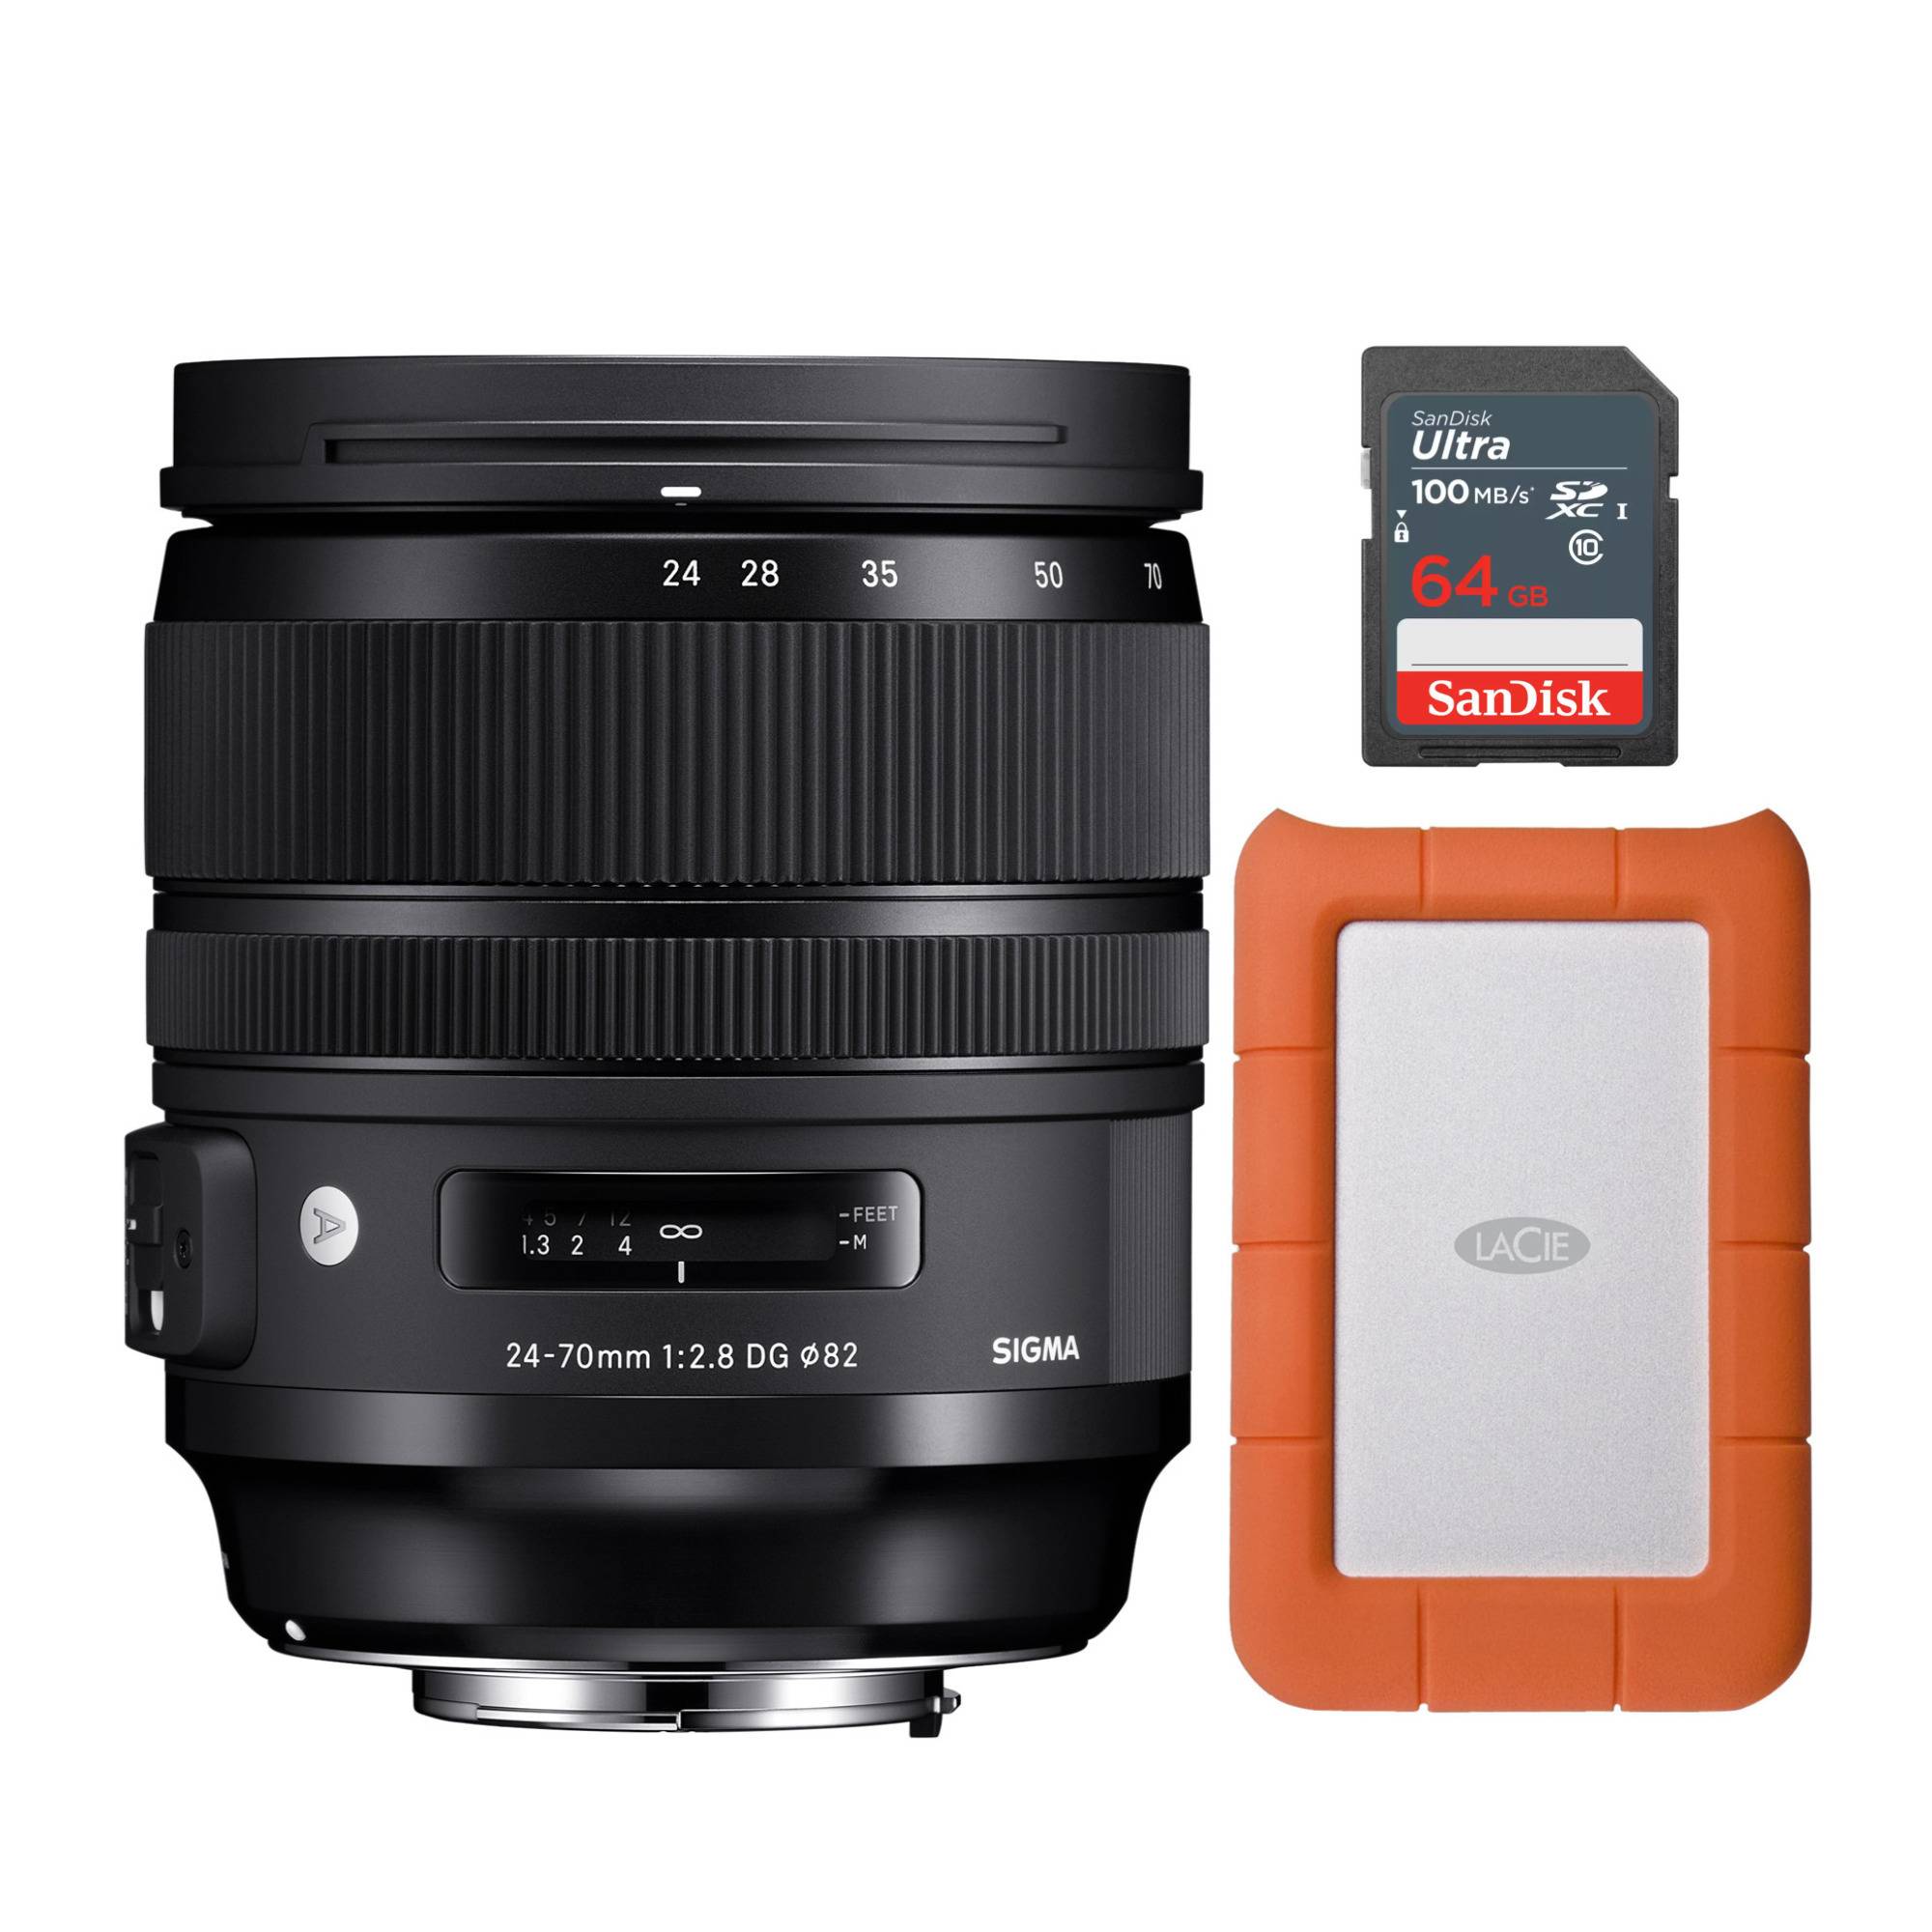 Sigma 24-70mm f2.8 DG OS HSM ART Lens for Nikon F with 1 TB Hard Drive and 64GB SDXC Memory Card